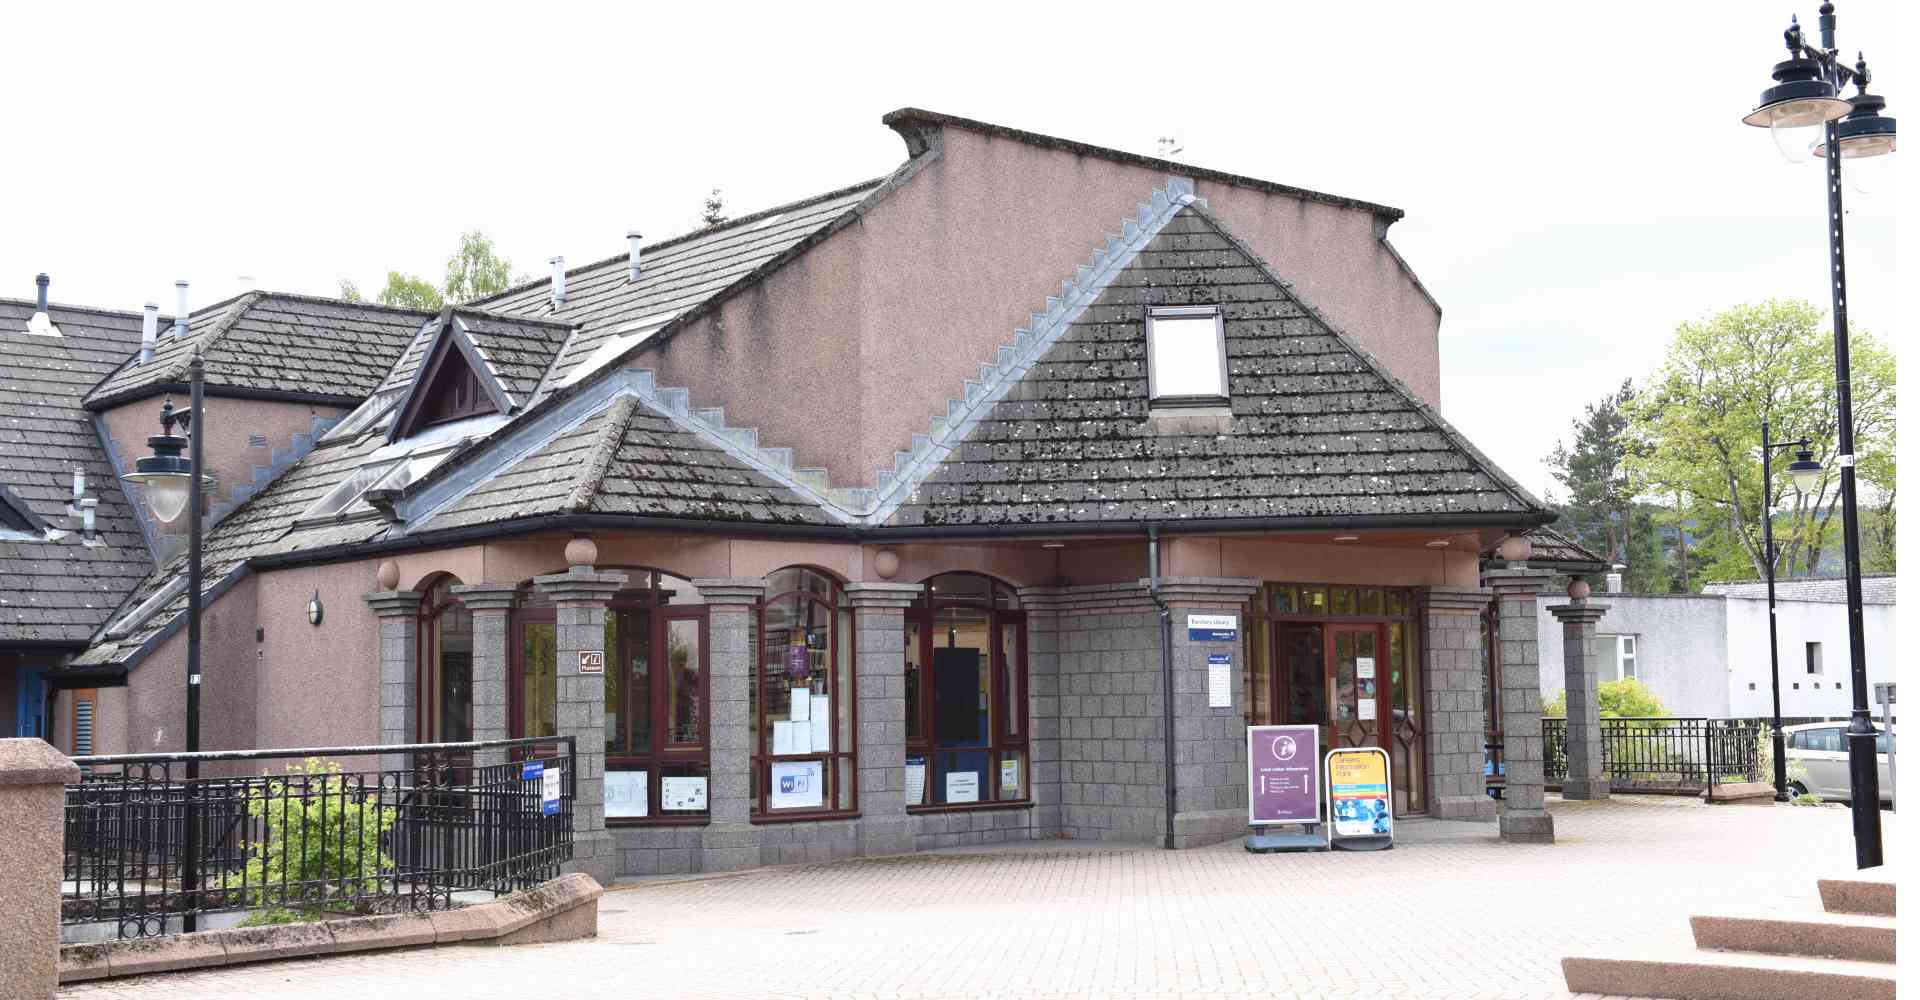 Banchory Library exterior